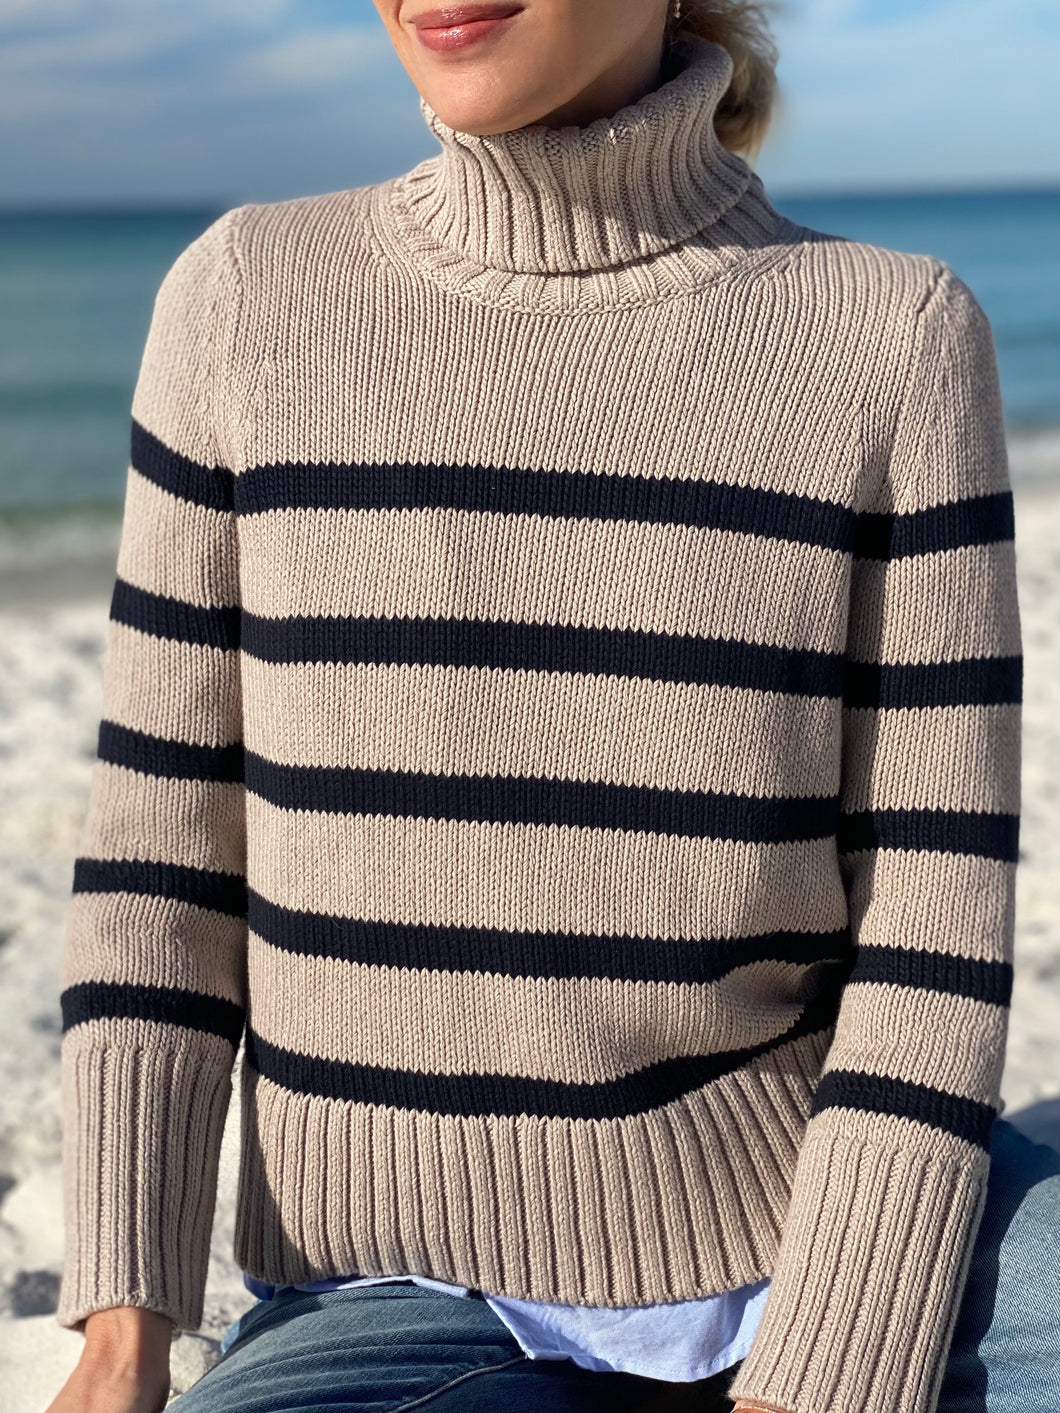 The Wynn Cotton Sweater in Oatmeal and Navy